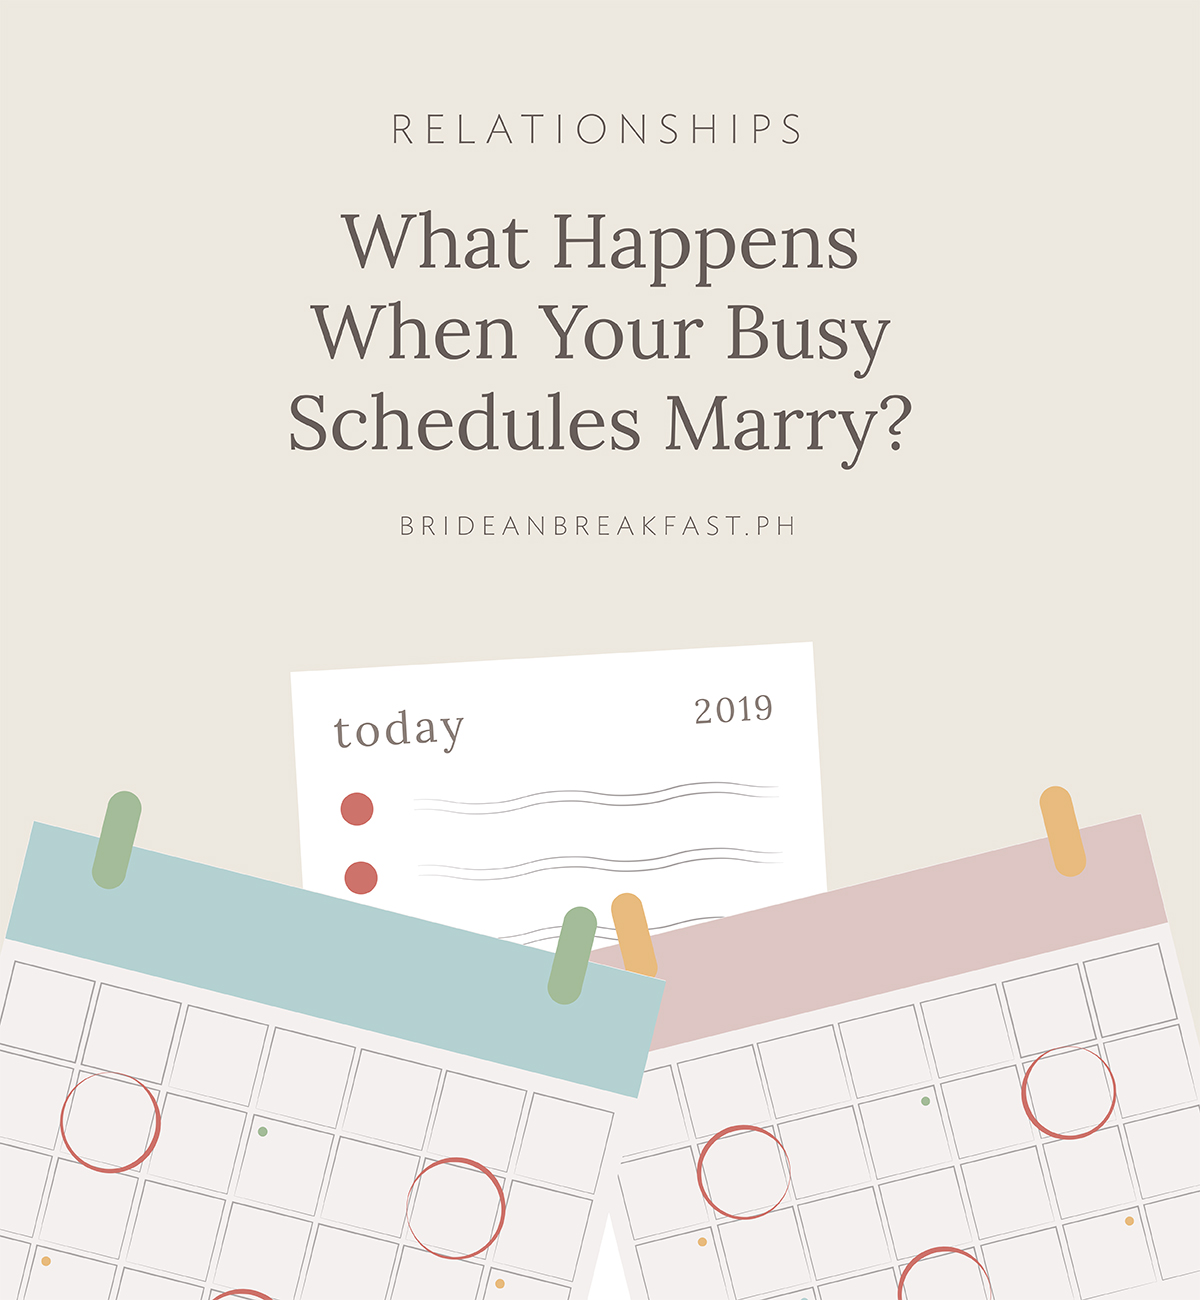 What Happens When Your Busy Schedules Marry?